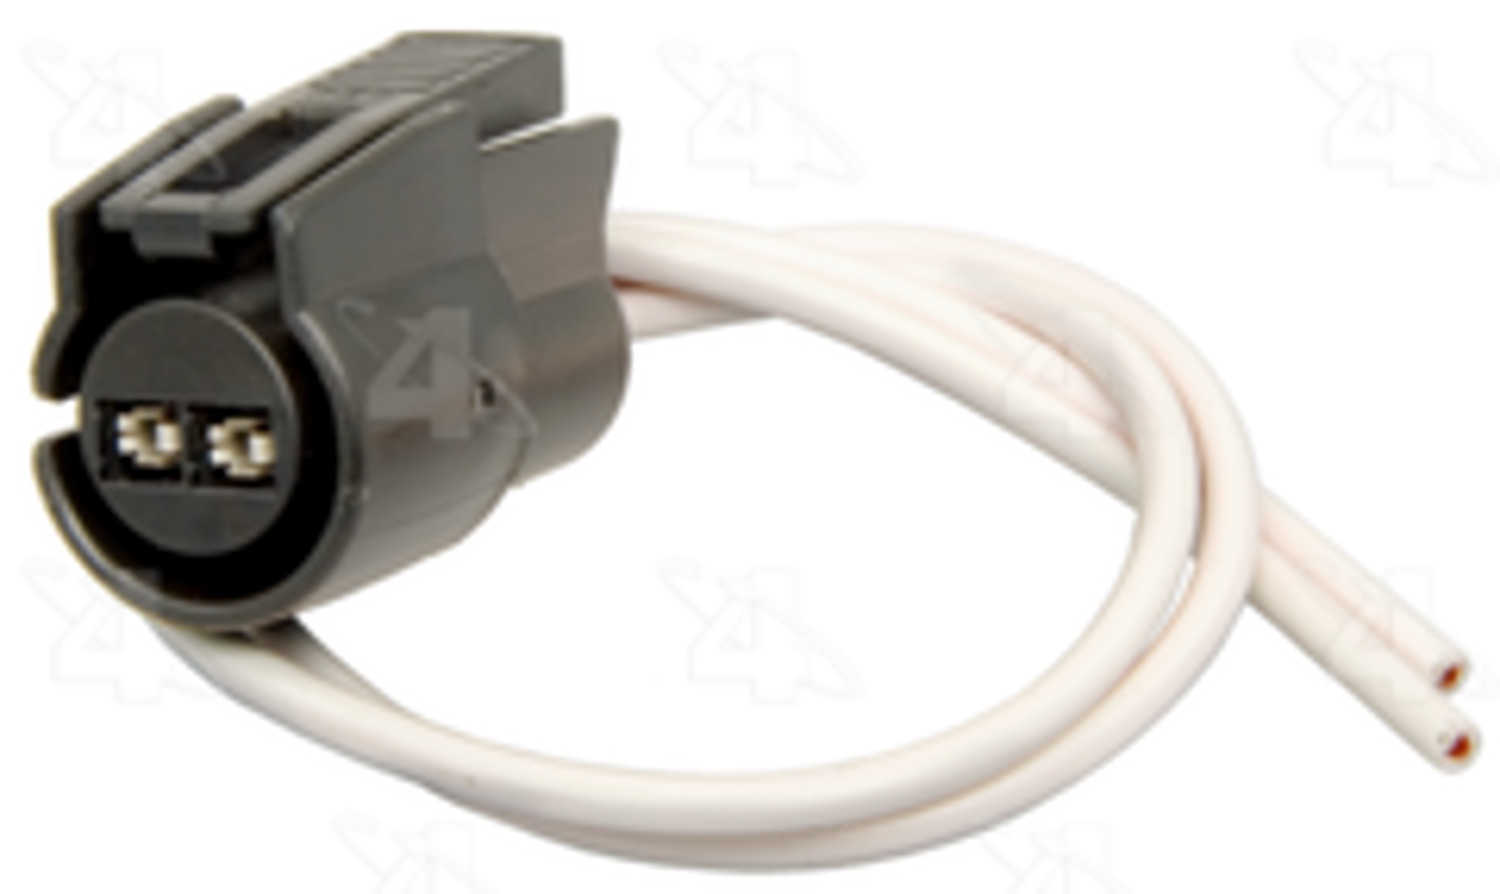 FOUR SEASONS - A/C Condenser Fan Switch Harness Connector - FSE 37227